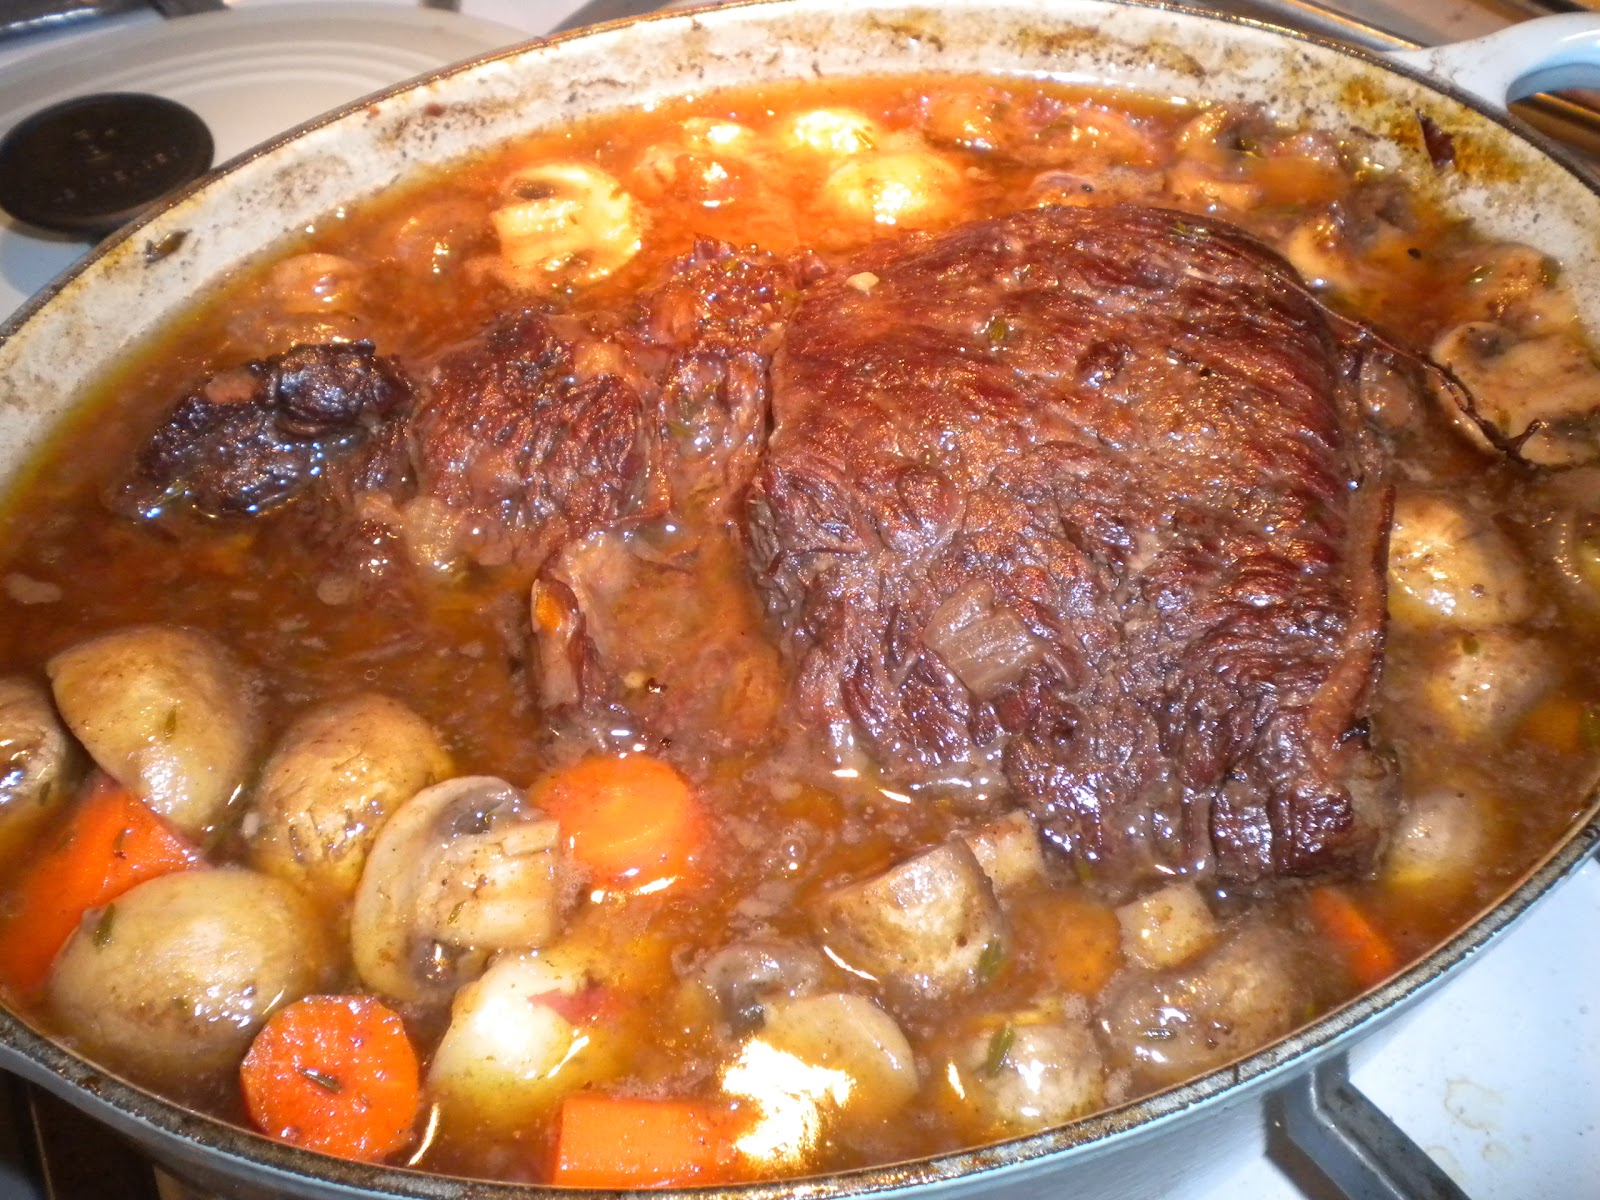 What is a recipe using chuck roast cooked in the oven?